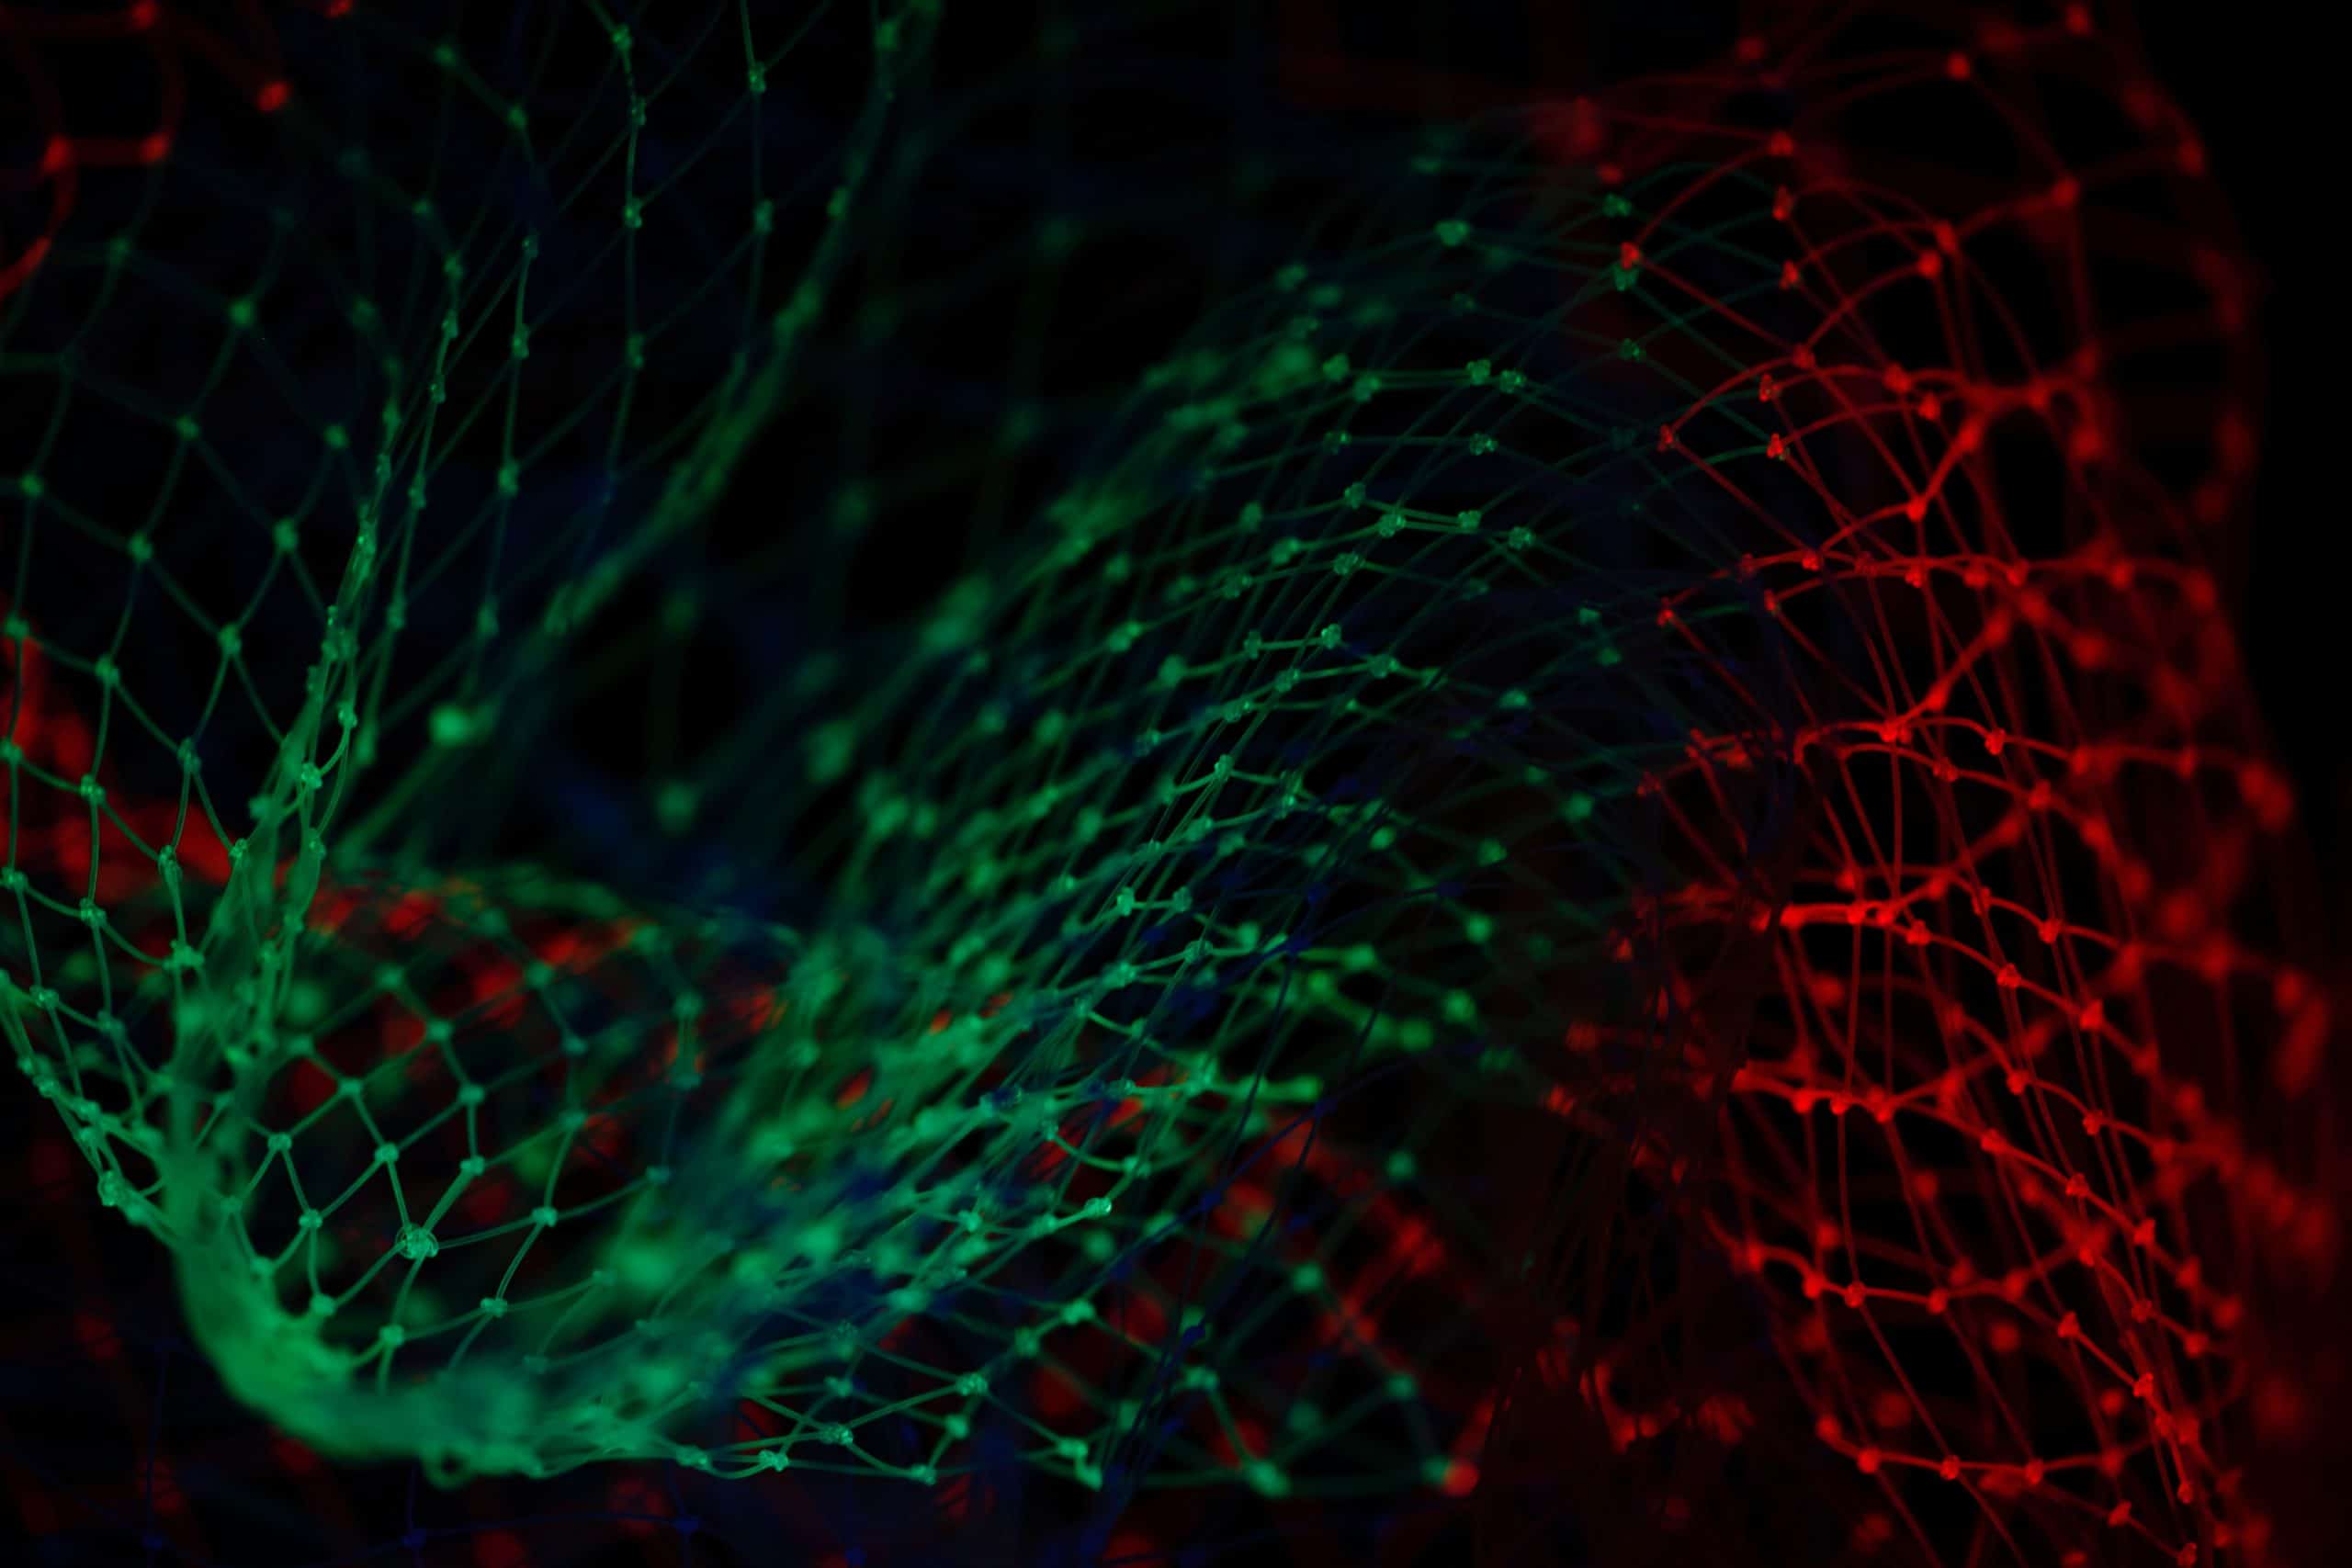 A close up of a green and red net.